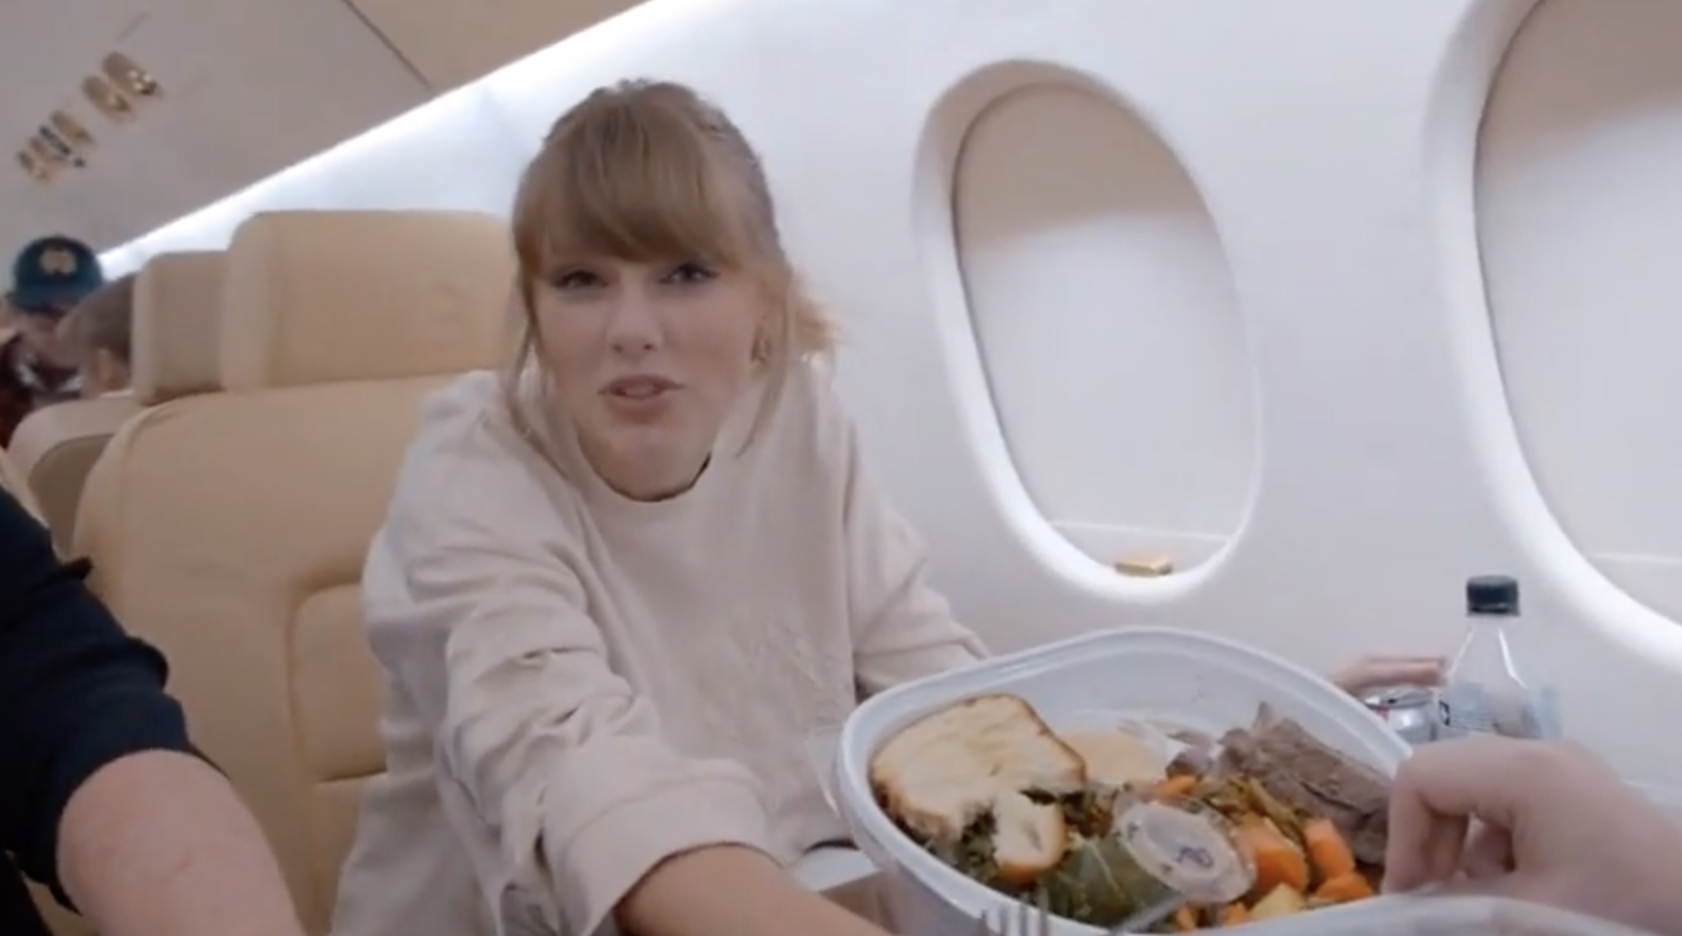 Taylor Swift Might Reference The Private Jet Backlash In "Anti-Hero"